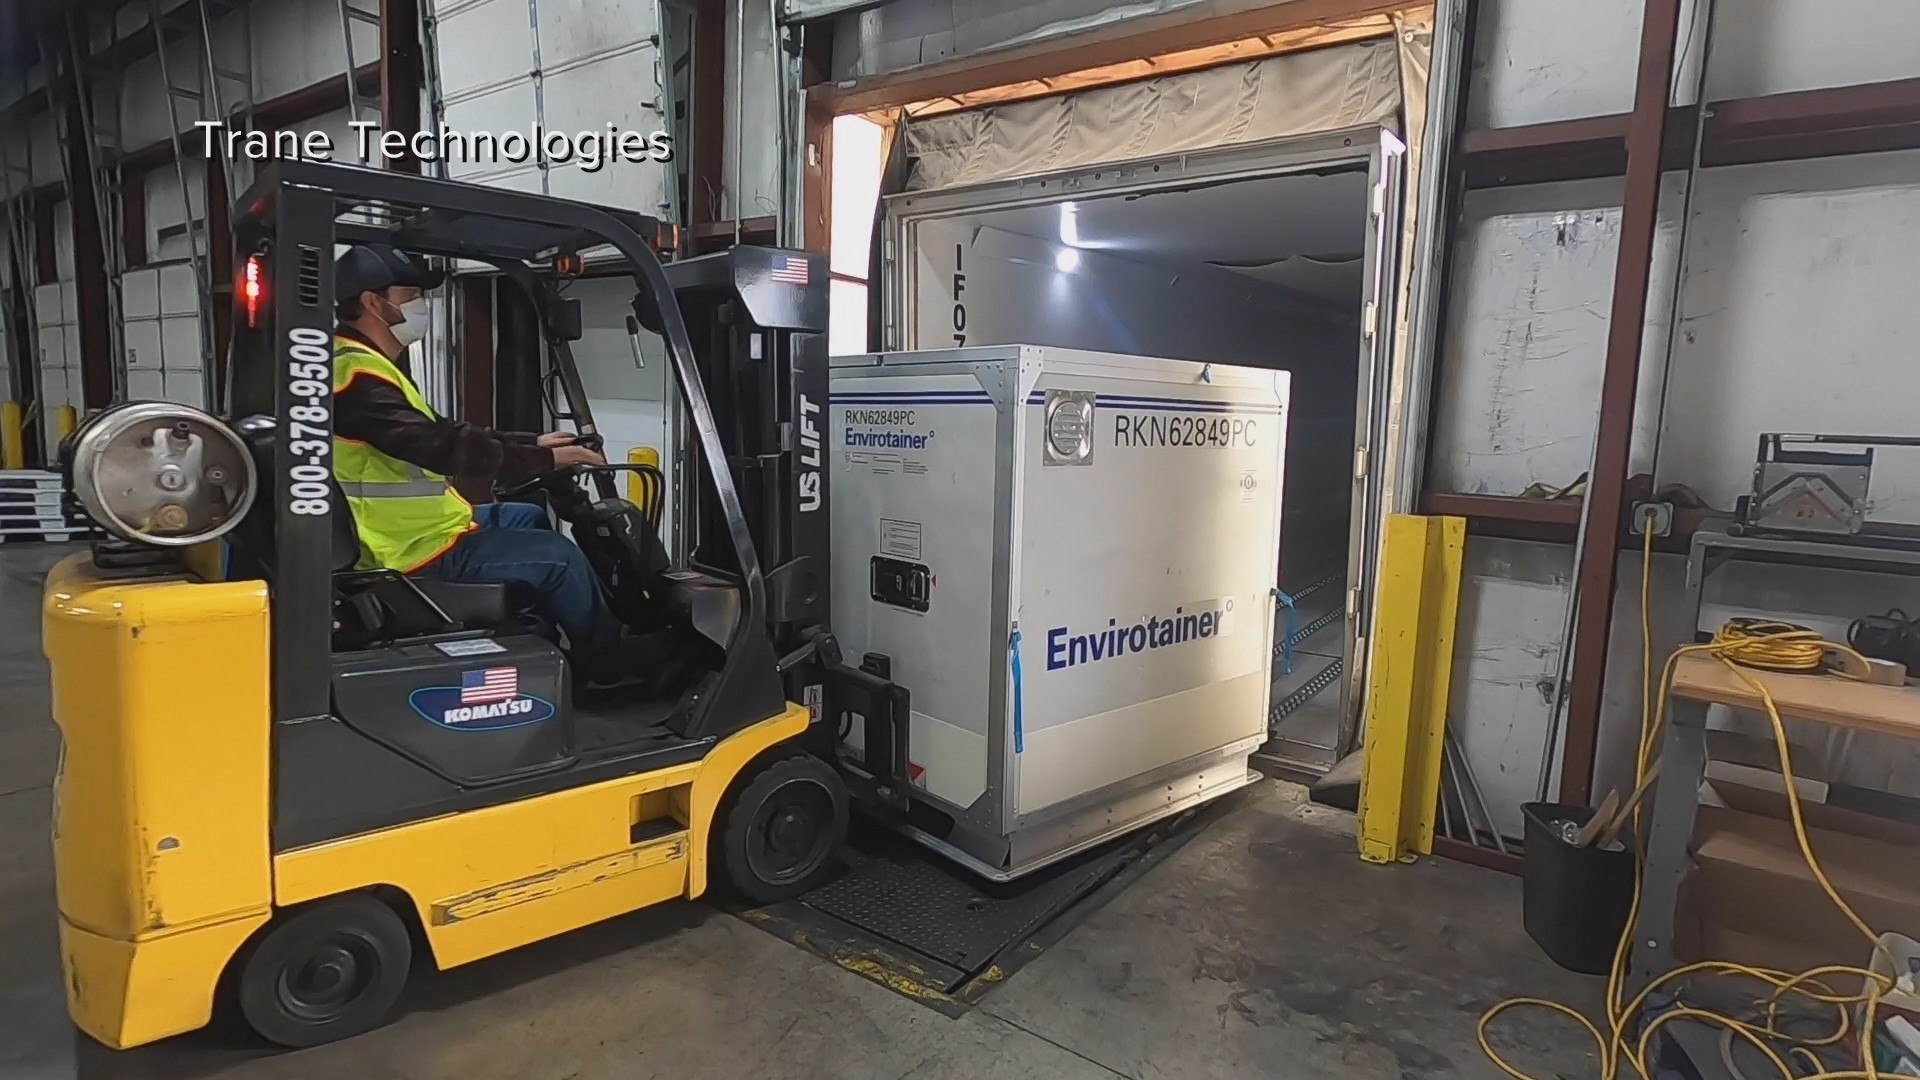 Thermo King, a brand of Davidson-based Trane Technologies, will be one piece of the logistical puzzle of transporting the vaccine from manufacturer to hospital.